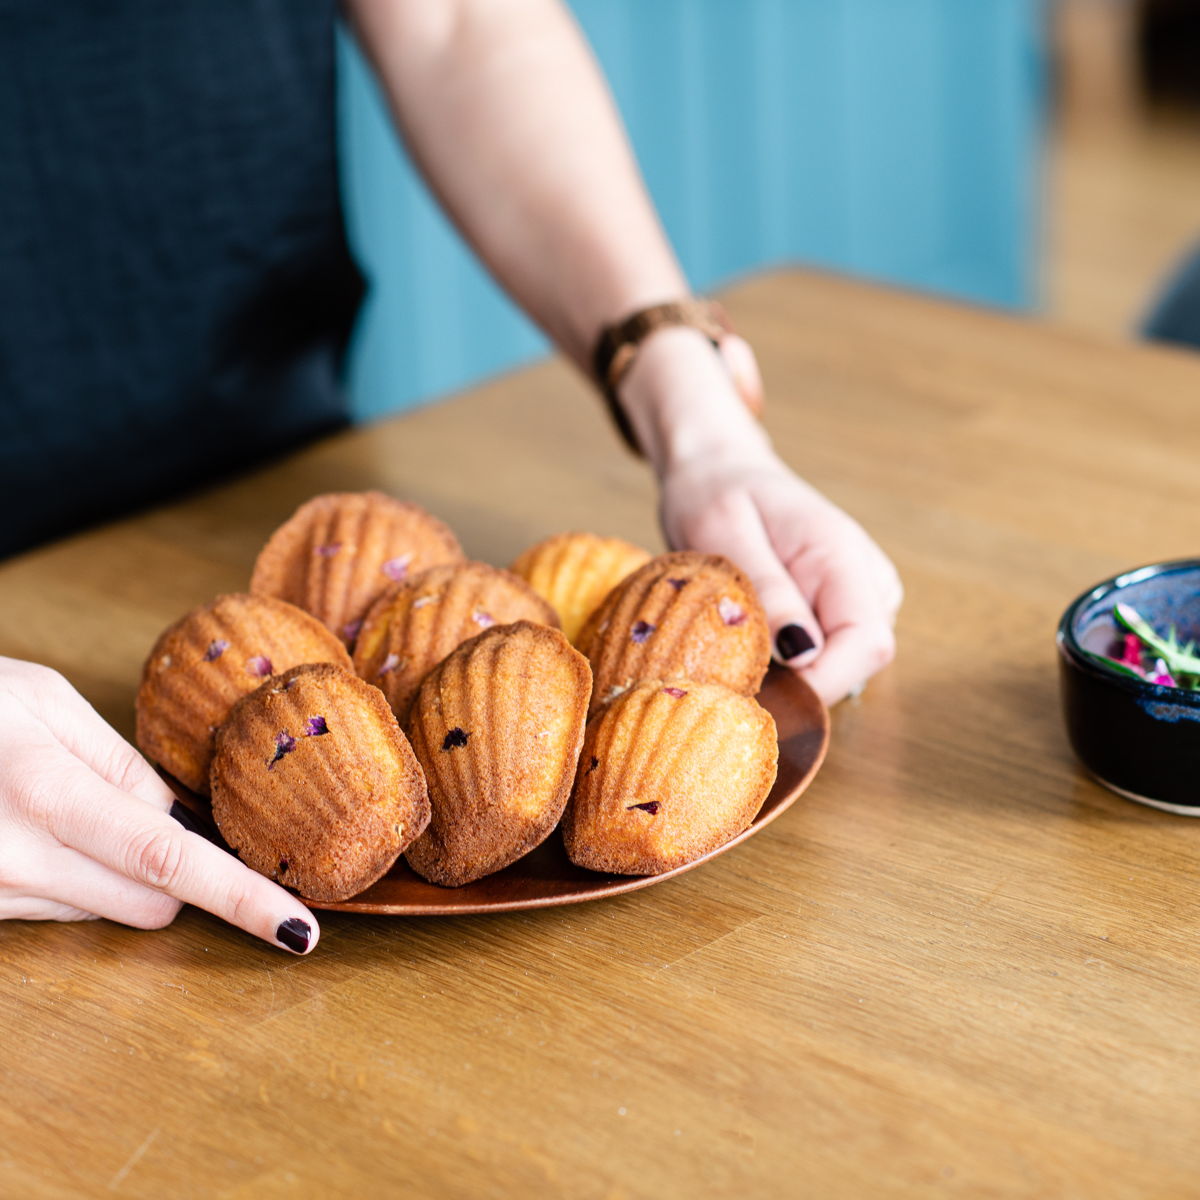 Master the art of baking French Madeleines